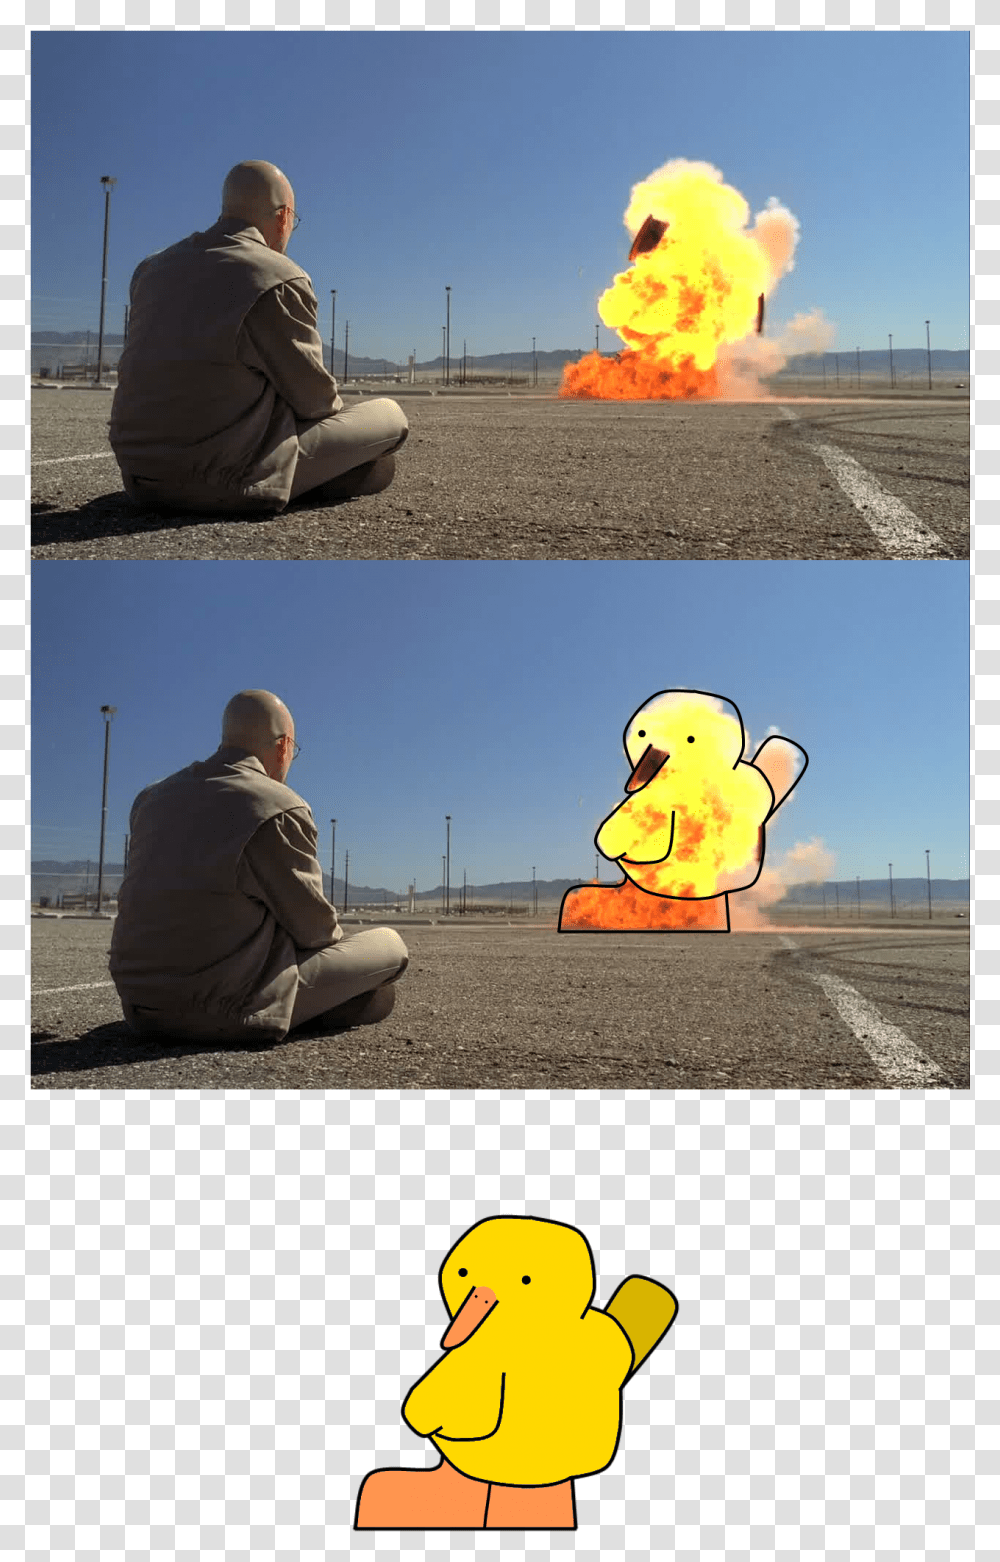 Walter White Saul Goodman Yellow Water Bird Ducks Geese Cool Men Dont Look At Explosions, Person, Giant Panda, Tire Transparent Png